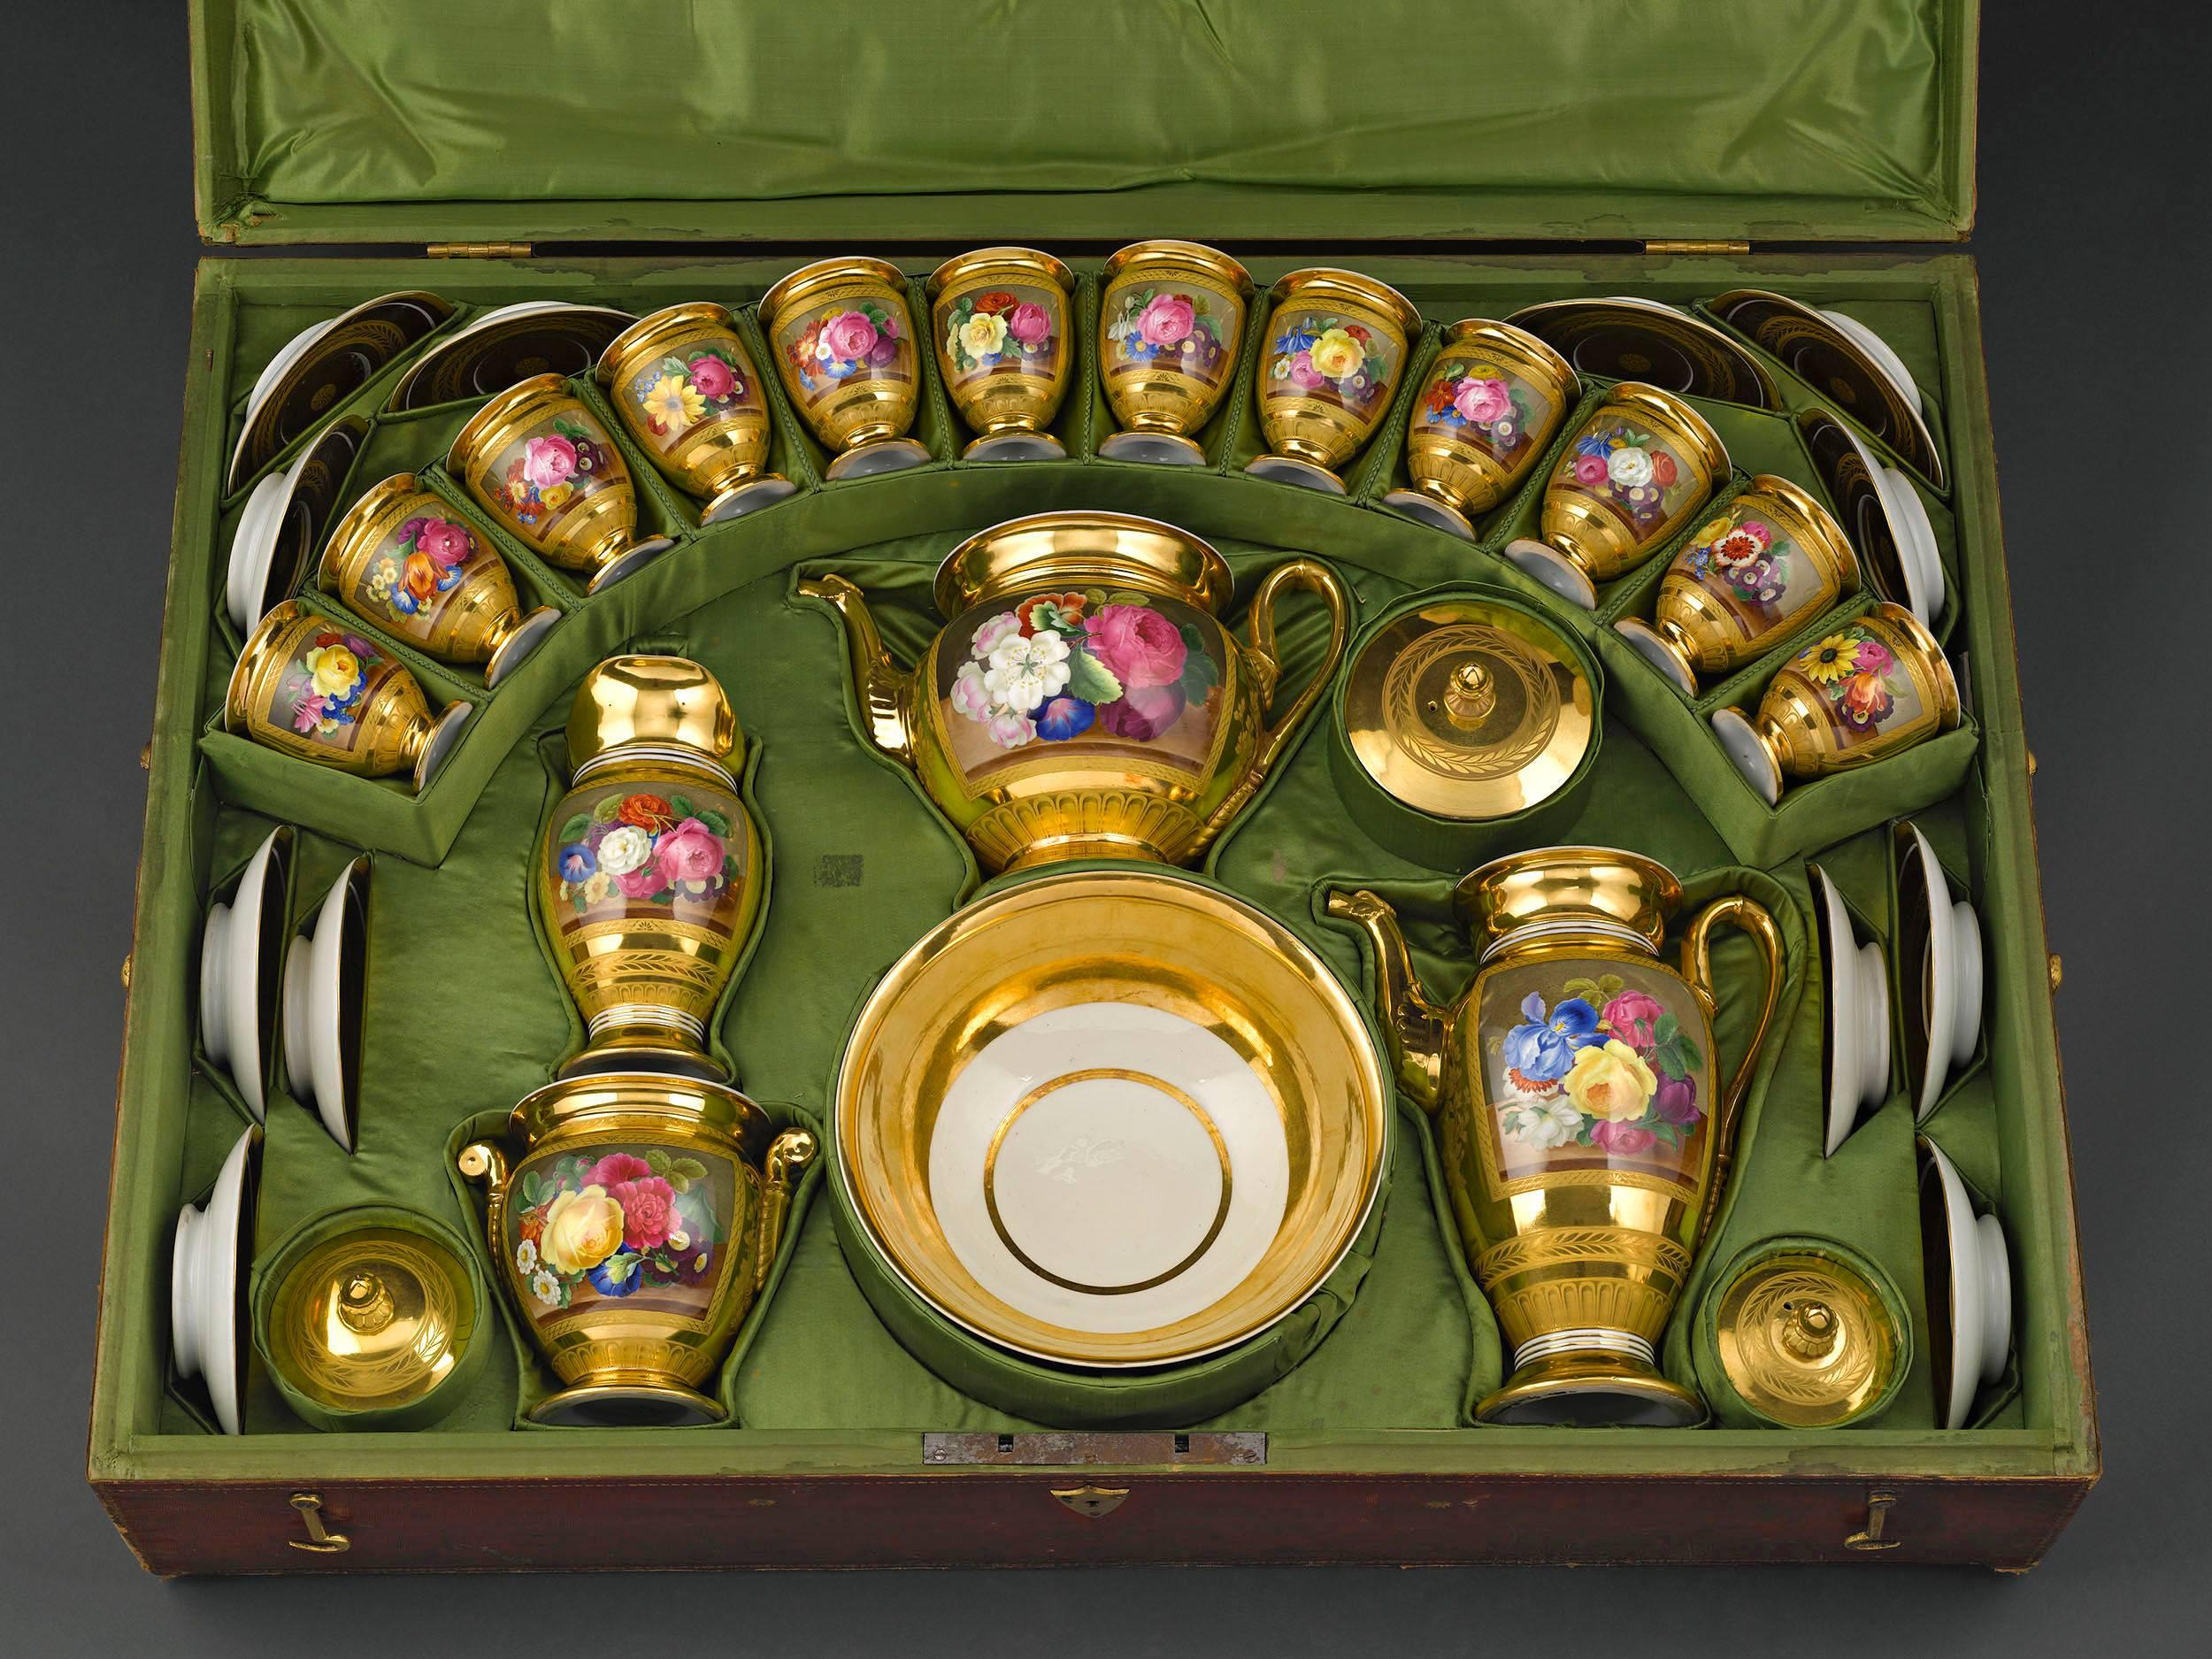 This rare and extensive Meissen porcelain tea and coffee service displays exceptional artistry. Each of the 39 exquisite pieces features delicately hand-painted cartouches of the popular “Meissen Rose” within a floral still-life. Each unique